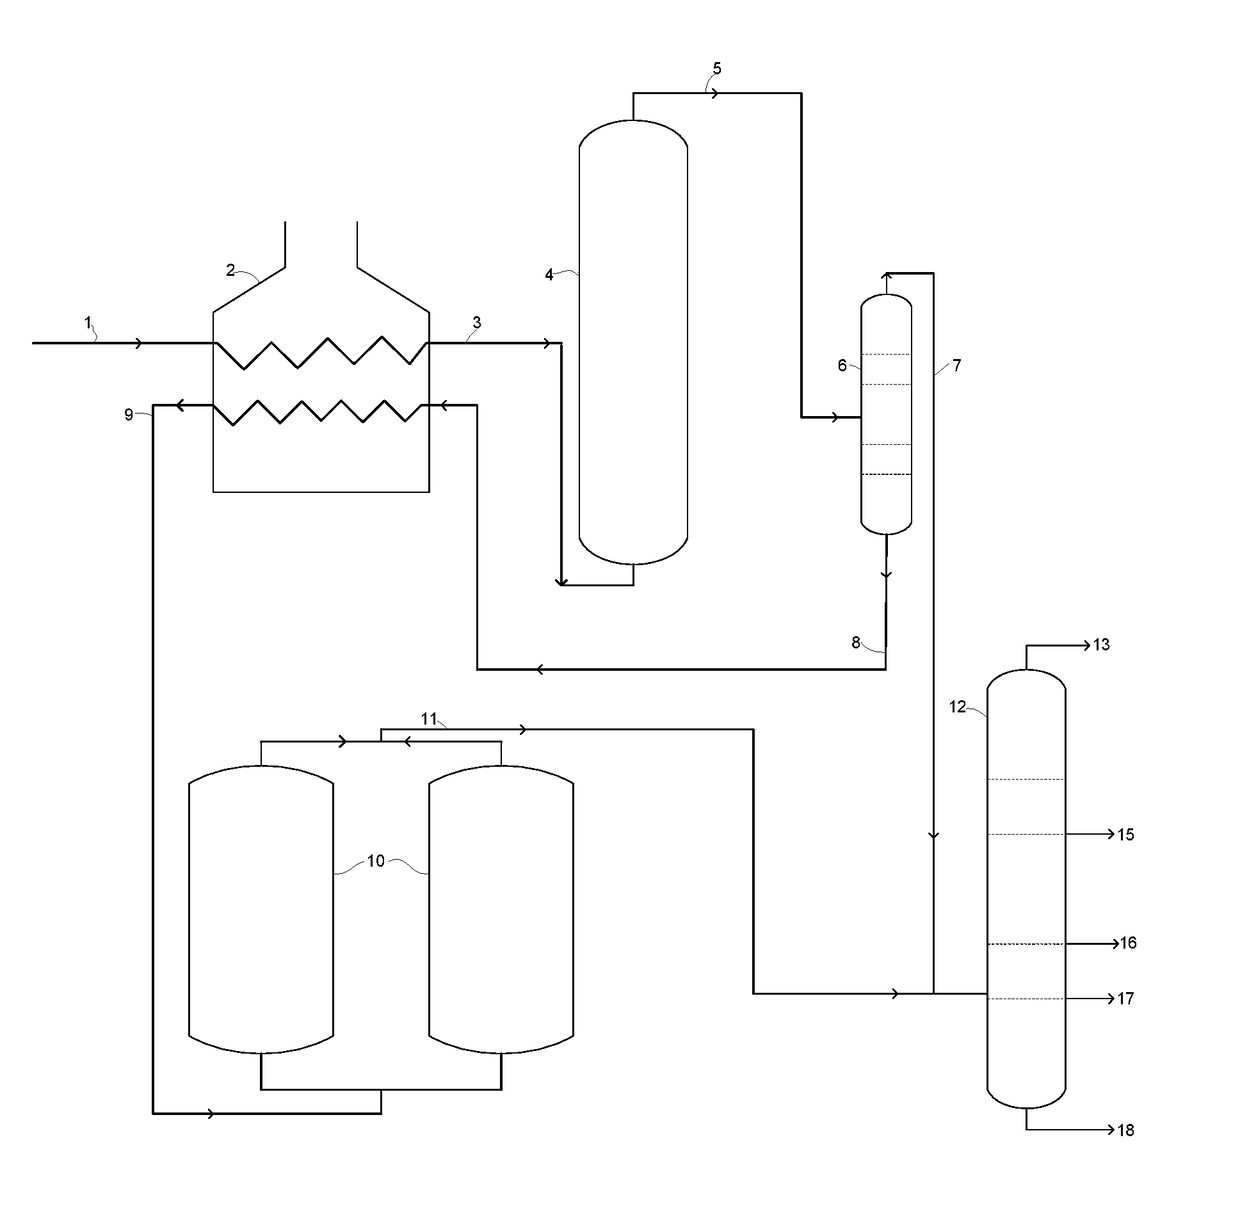 Delayed coking process with pre-cracking reactor